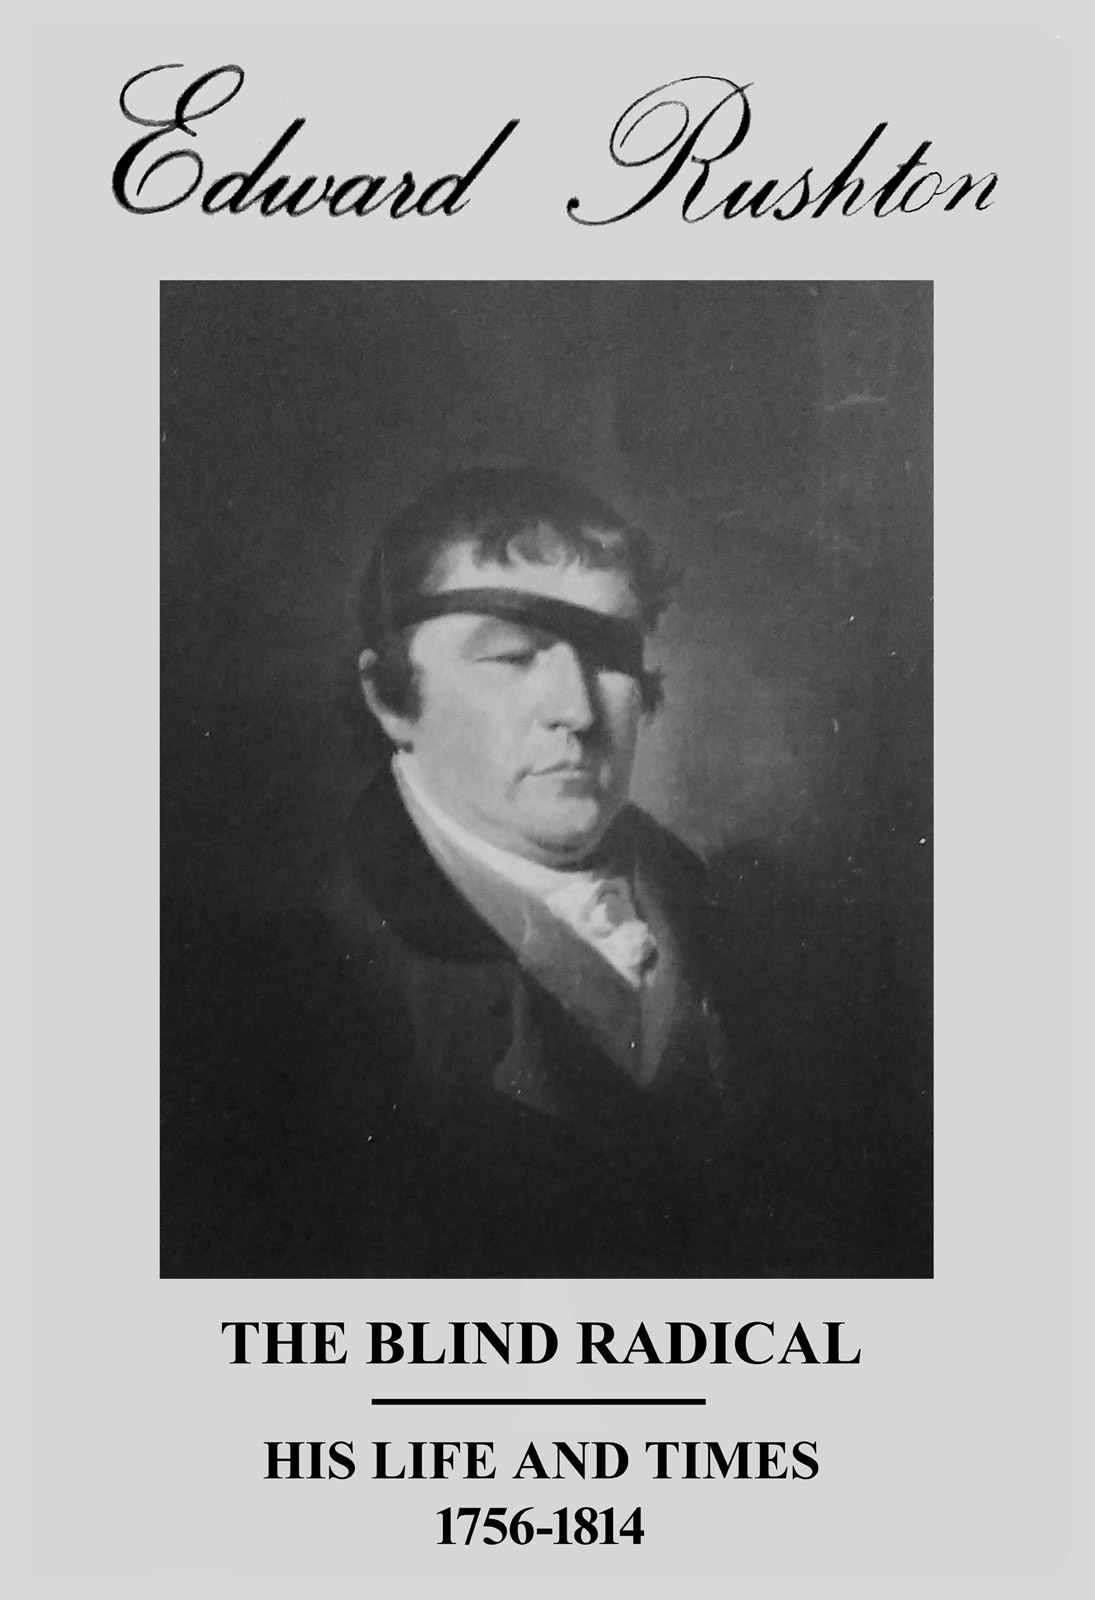 1. Edward Rushton - The Blind Radical - His Life and Times - 1756-1814